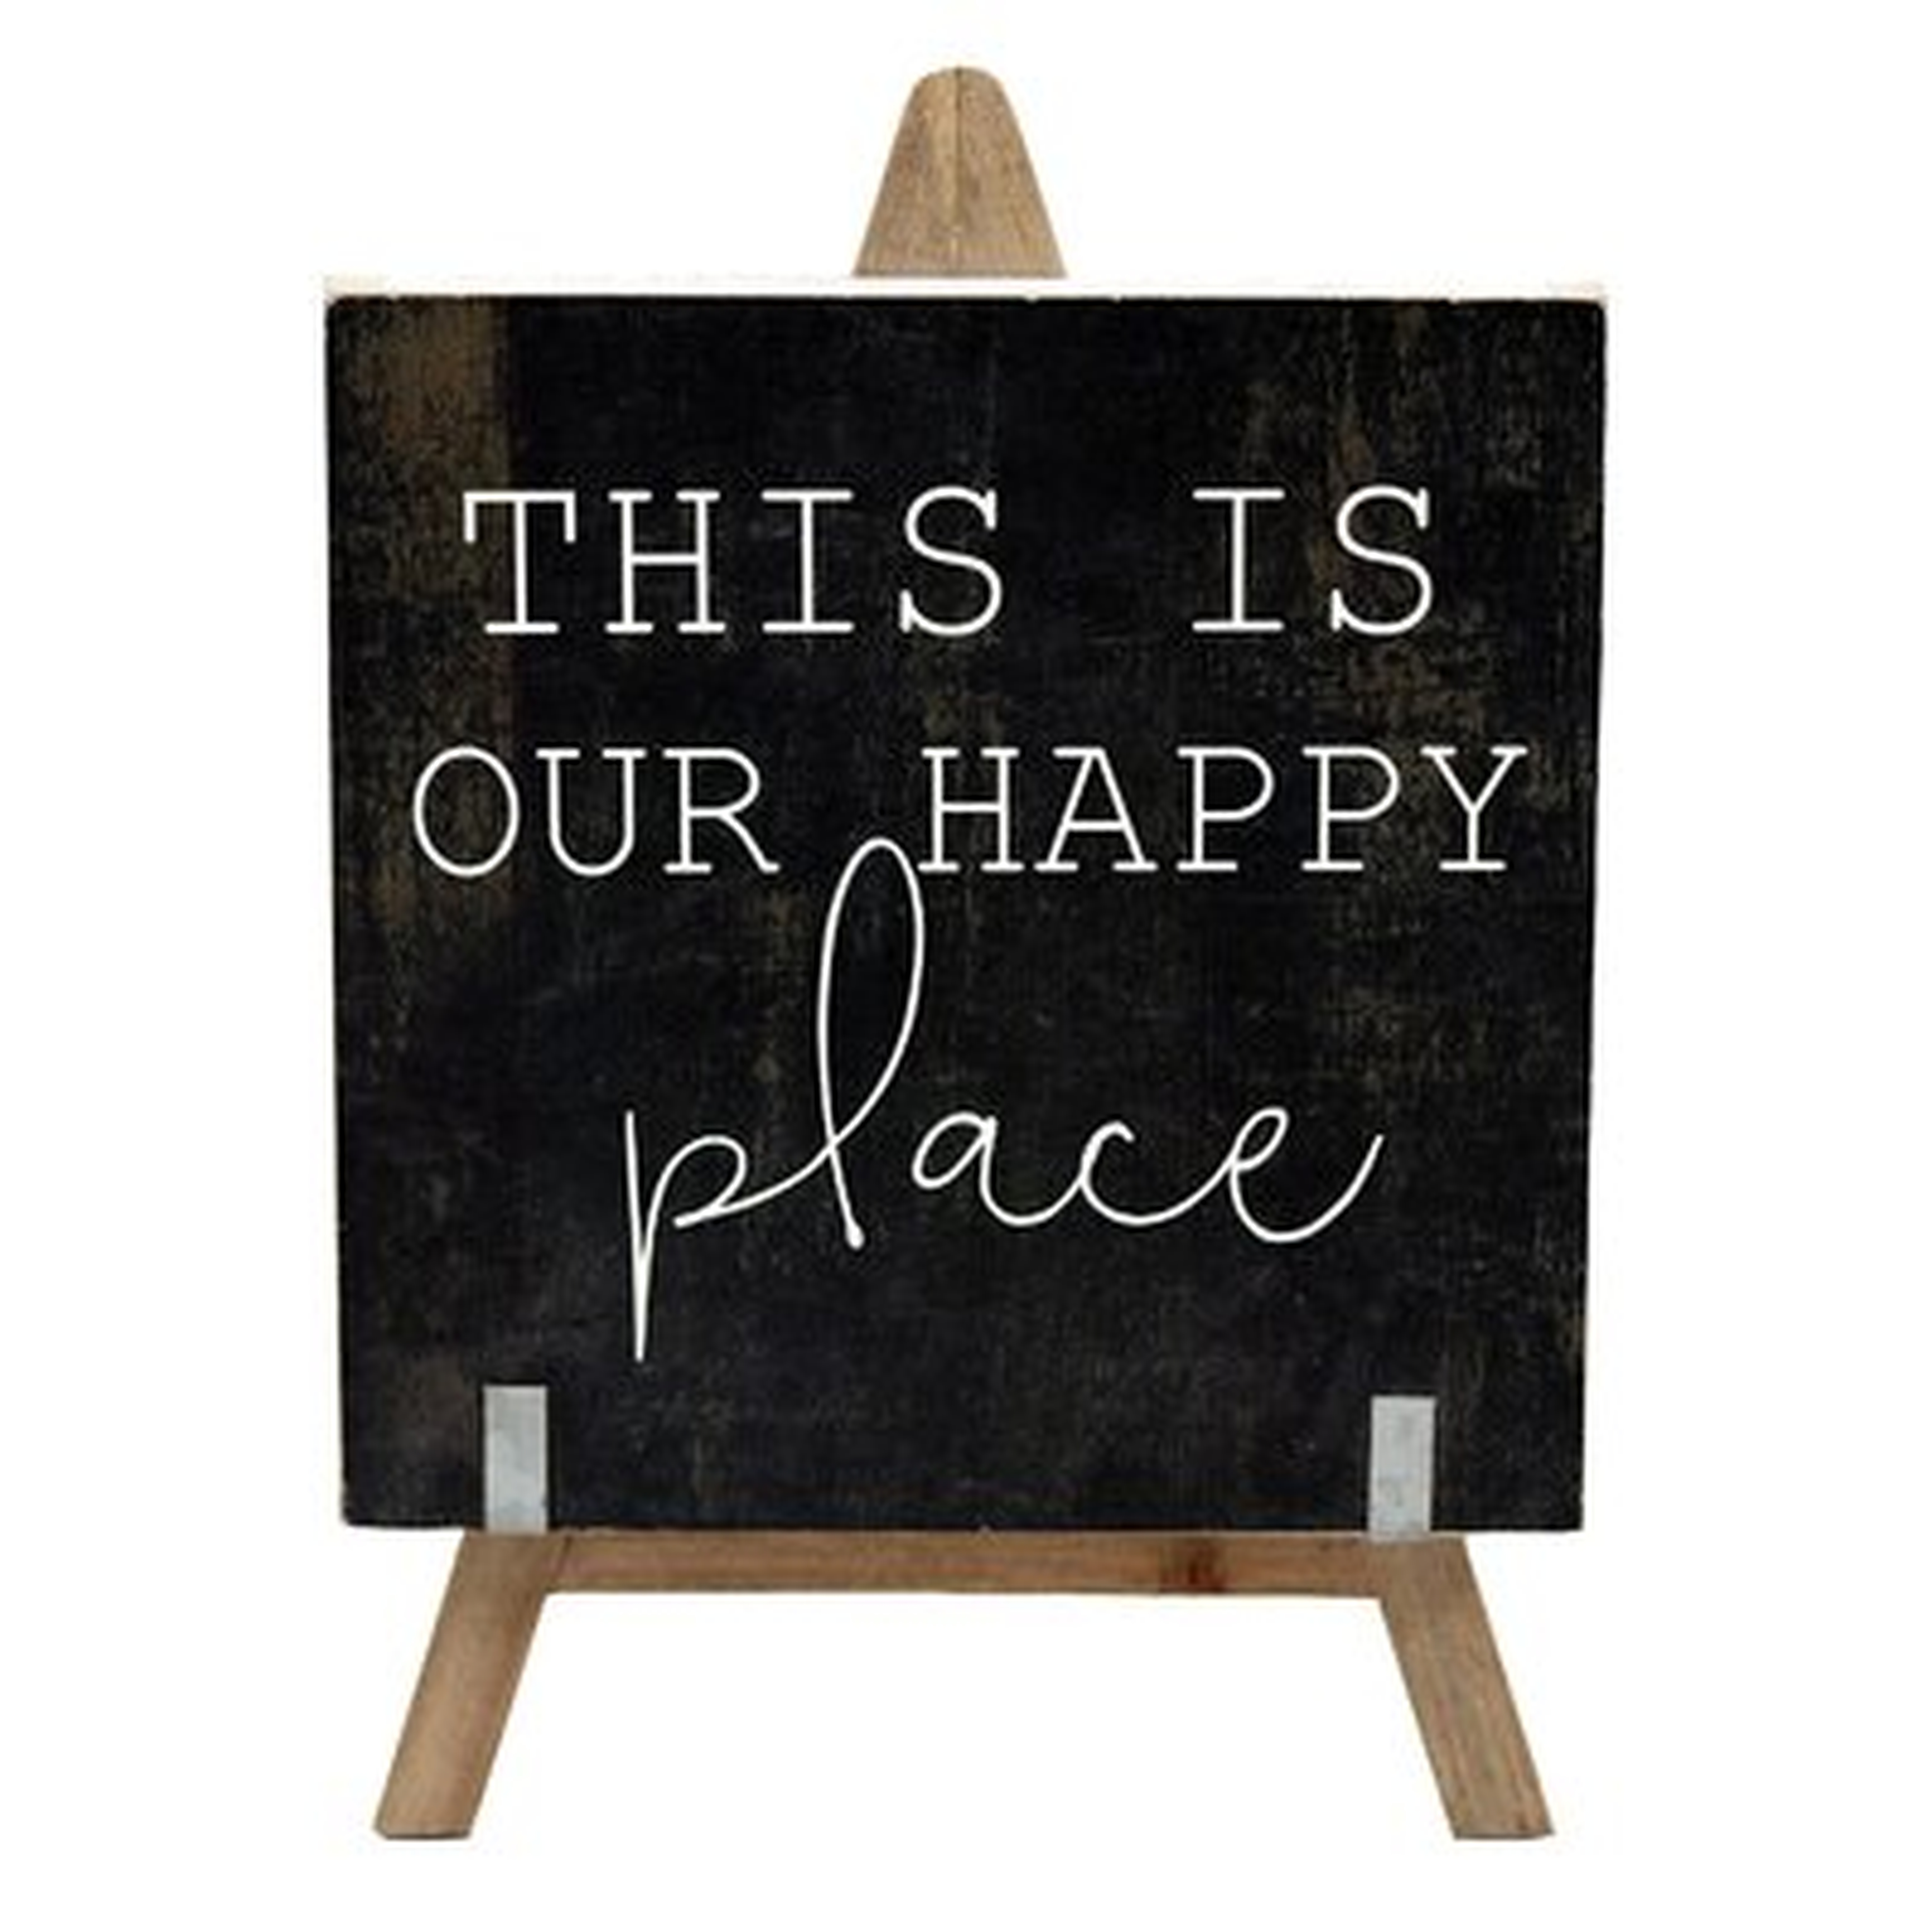 Motlie This is our Happy Place Wooden a Frame Freestanding Tabletop Decor - Wayfair